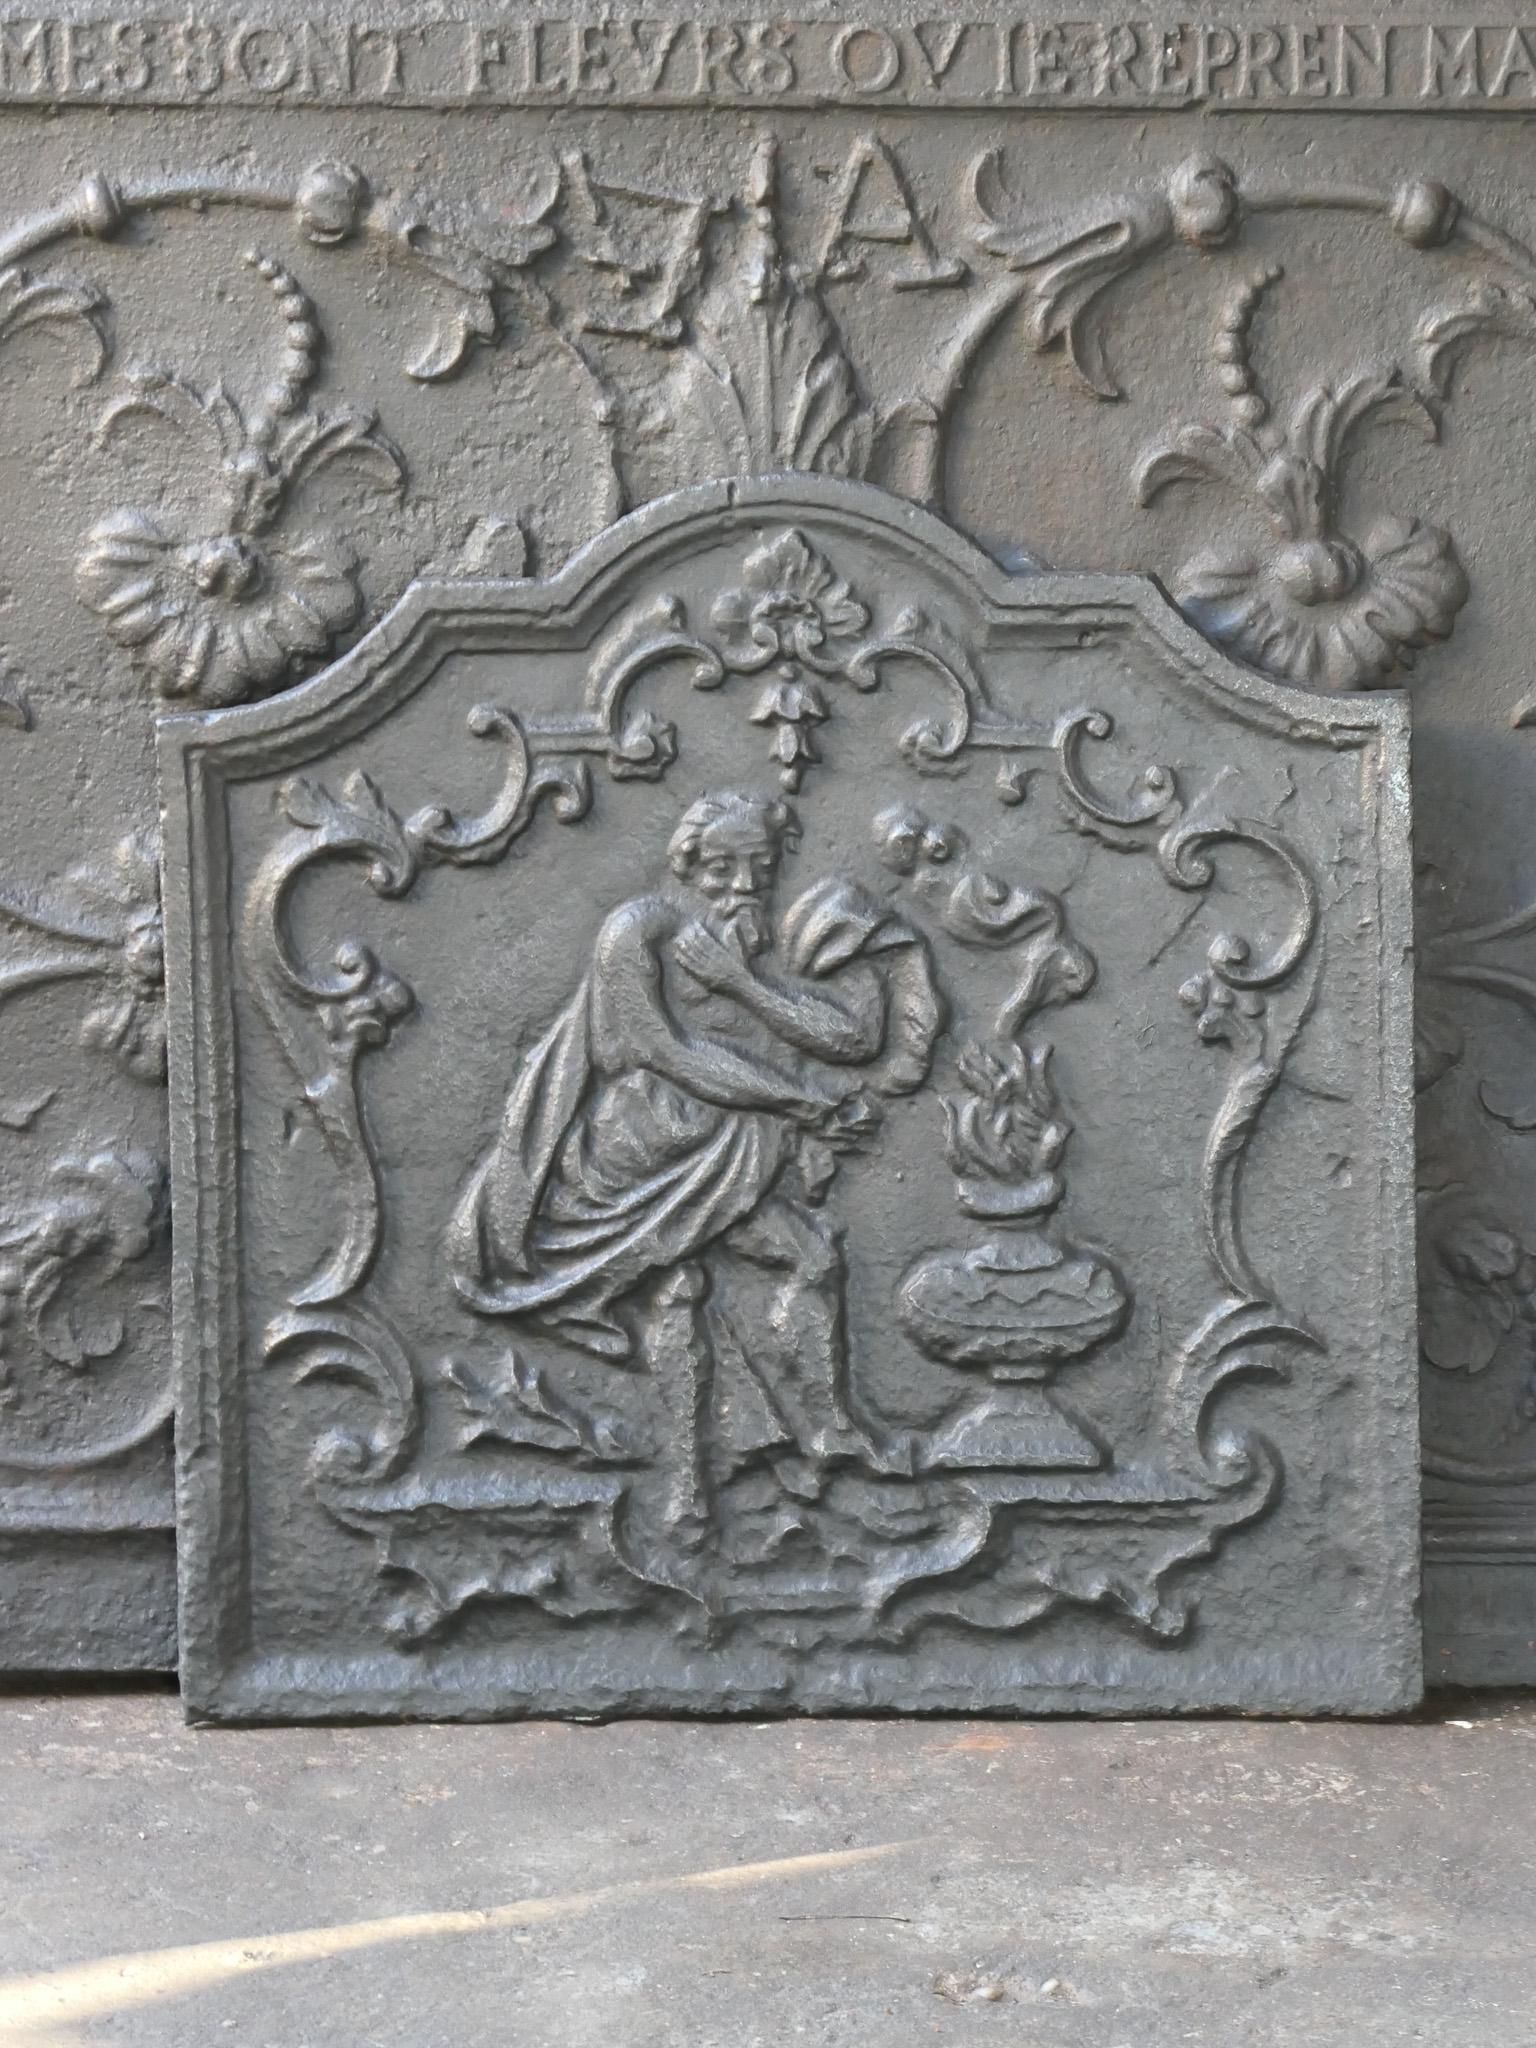 18th century French fireback symbolizing the winter. The winter is represented as an old man warming his hands.

The fireback has a black / pewter patina. The condition of the fireback is good and it is fit for use in the fireplace.






